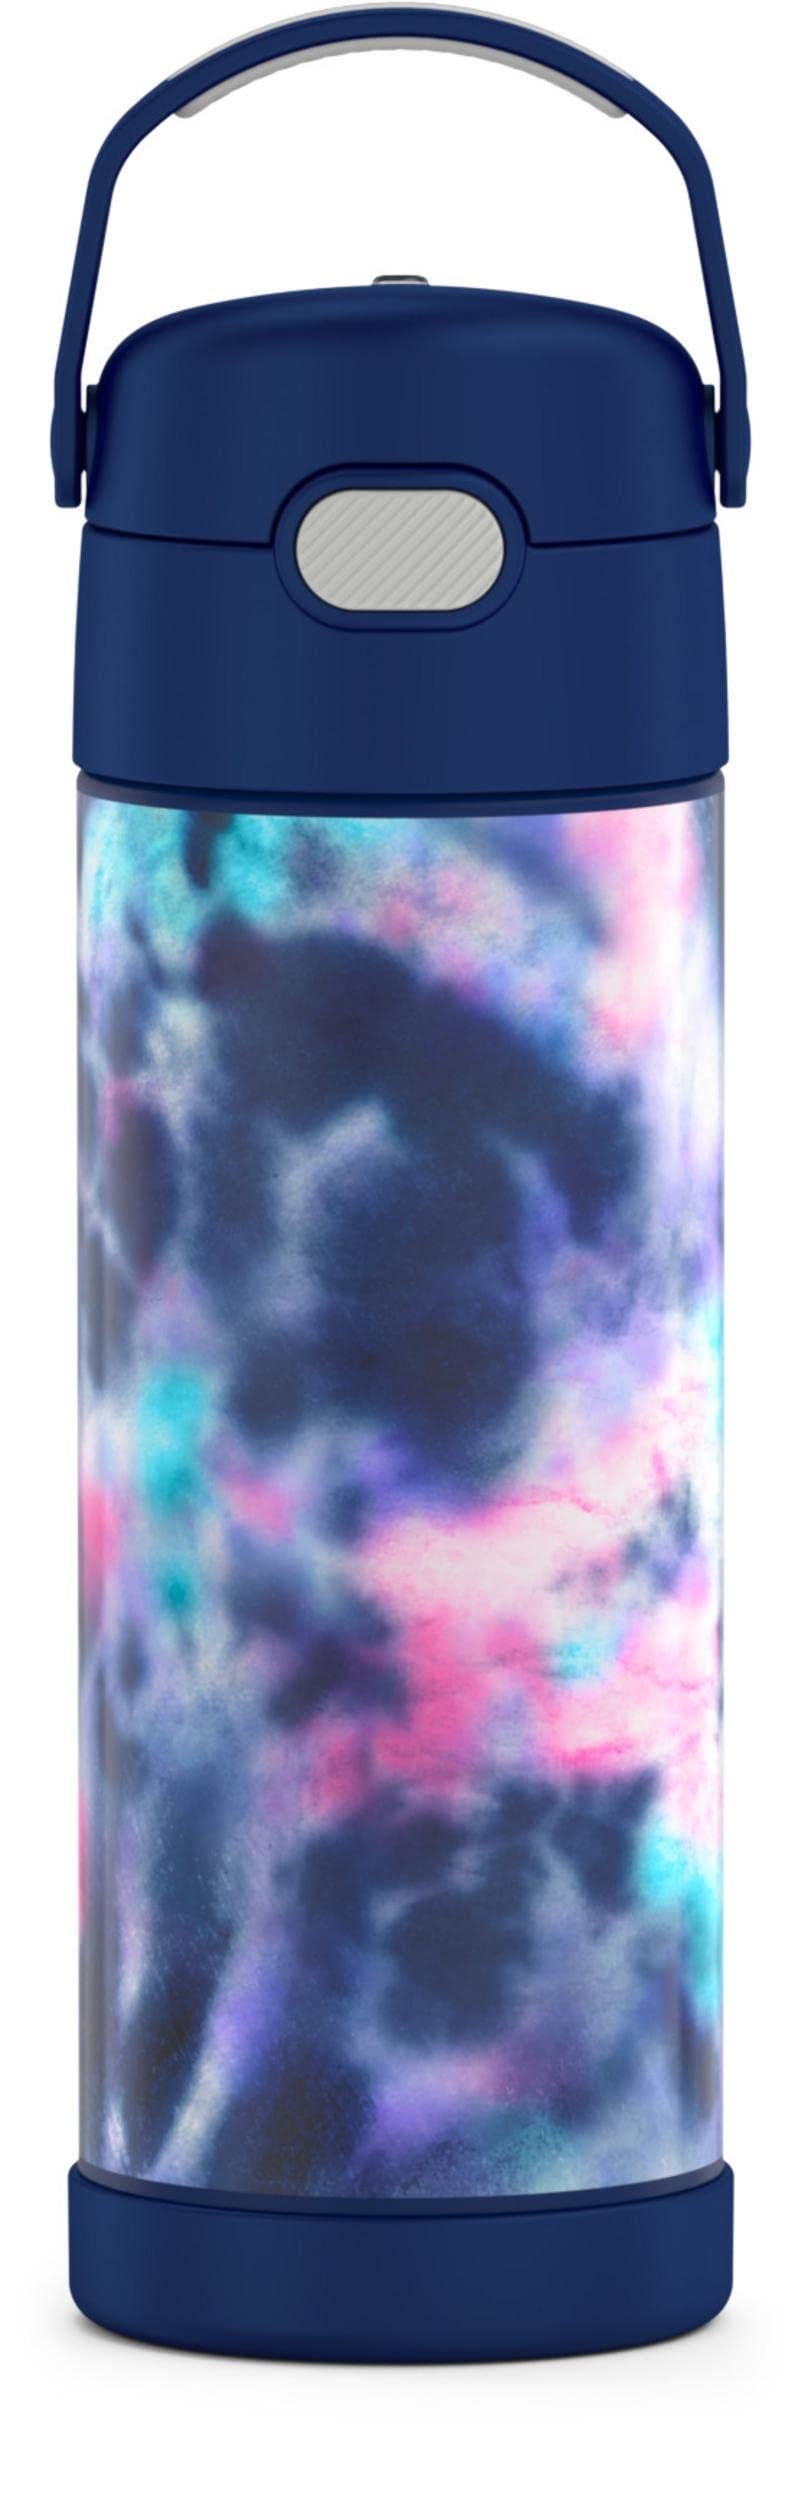 Tie Dye Thermos Funtainer 16 Ounce Stainless Steel Vacuum Insulated Bottle  with Wide Spout Lid: Fun and Functional!, by Zahir Kerimov